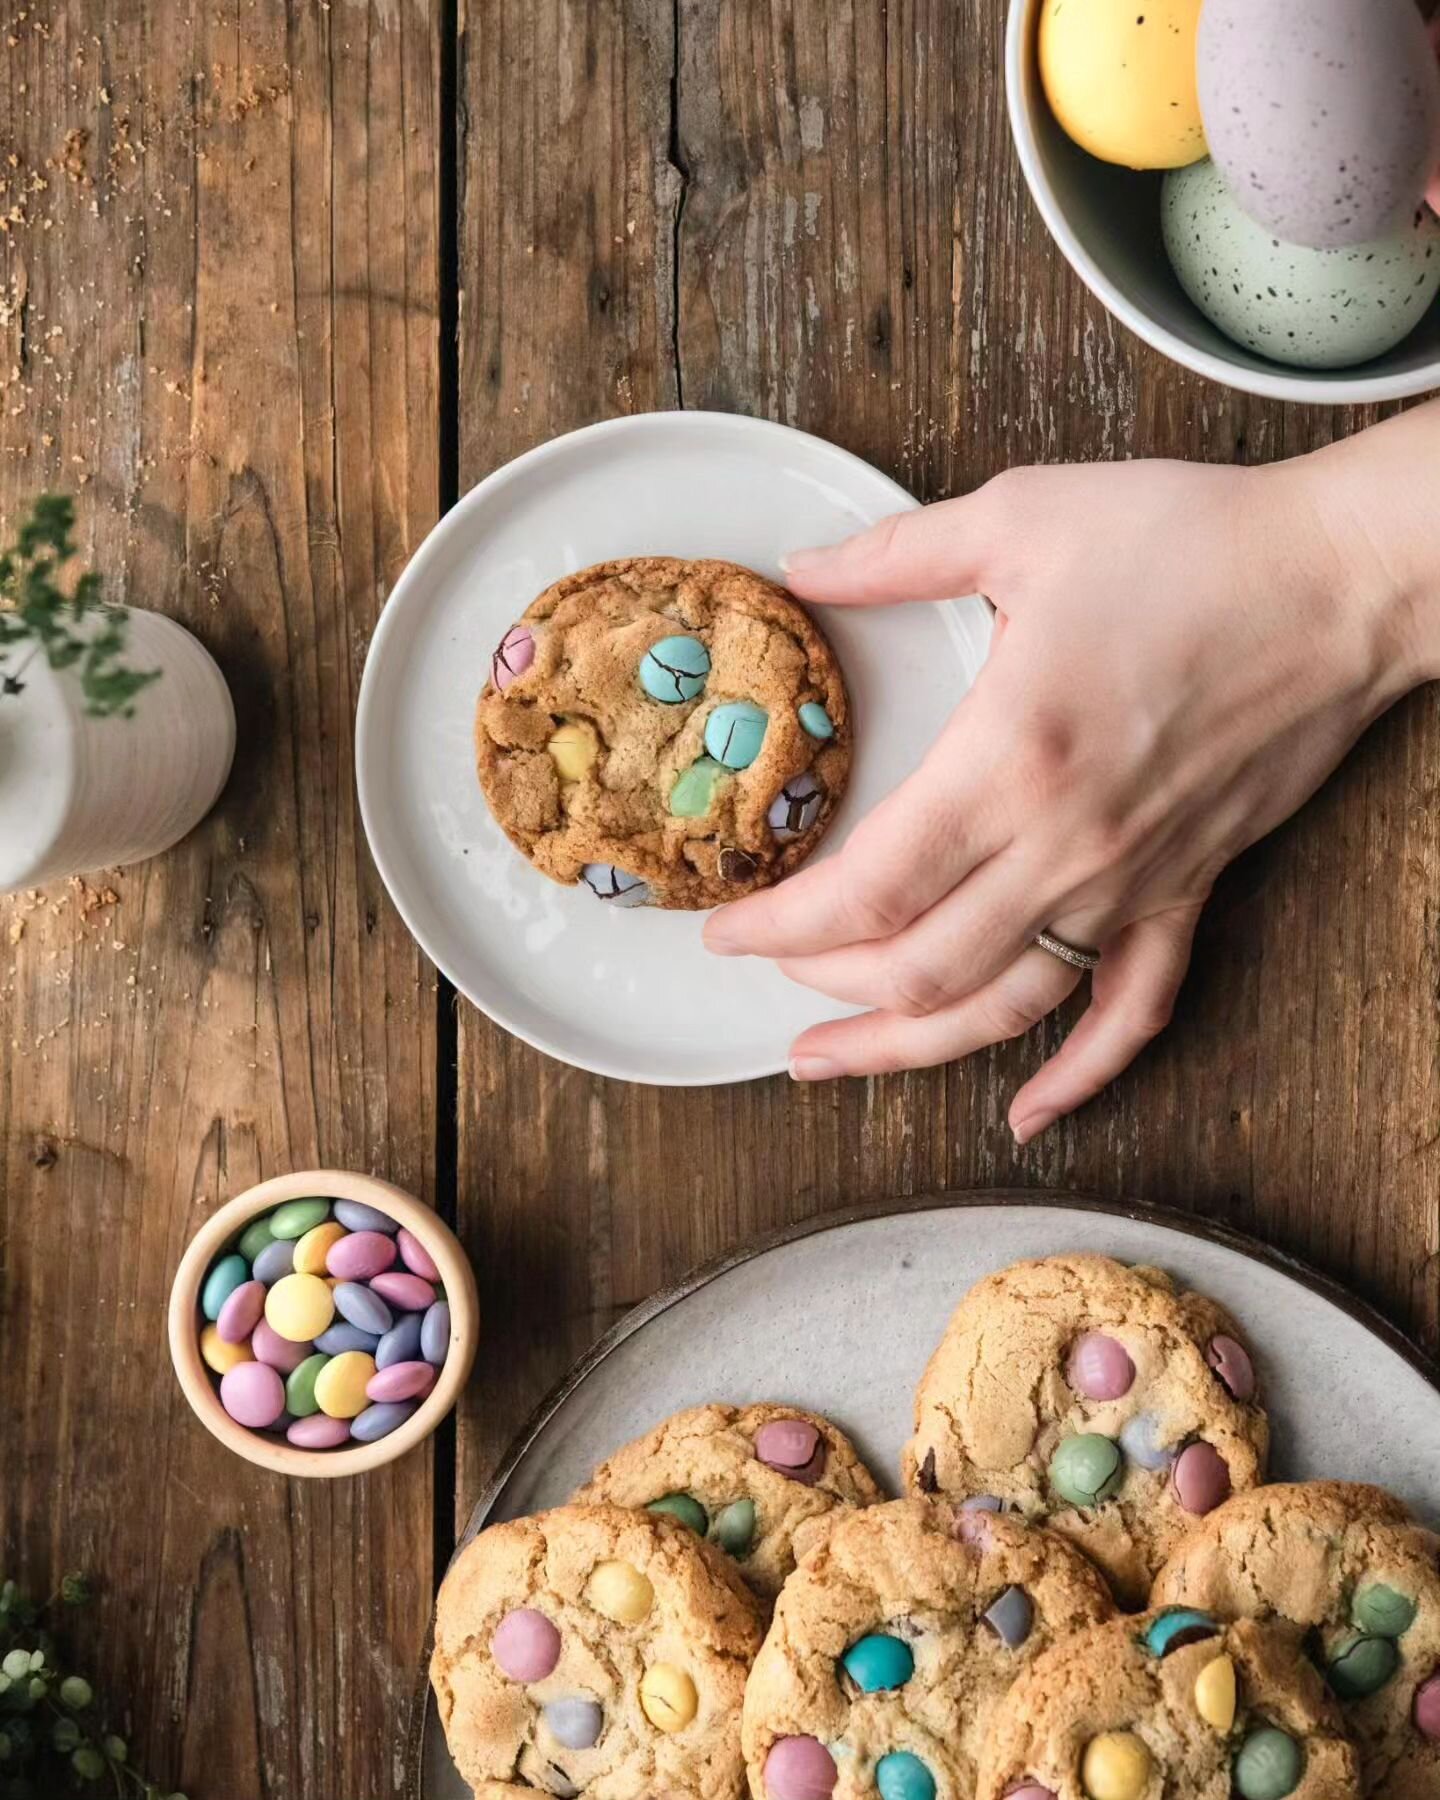 Just in time for Easter, here are some gluten free chocolate chip cookies featuring pastel blend @mmschocolate and @bobsredmill 1-1 gluten free flour.